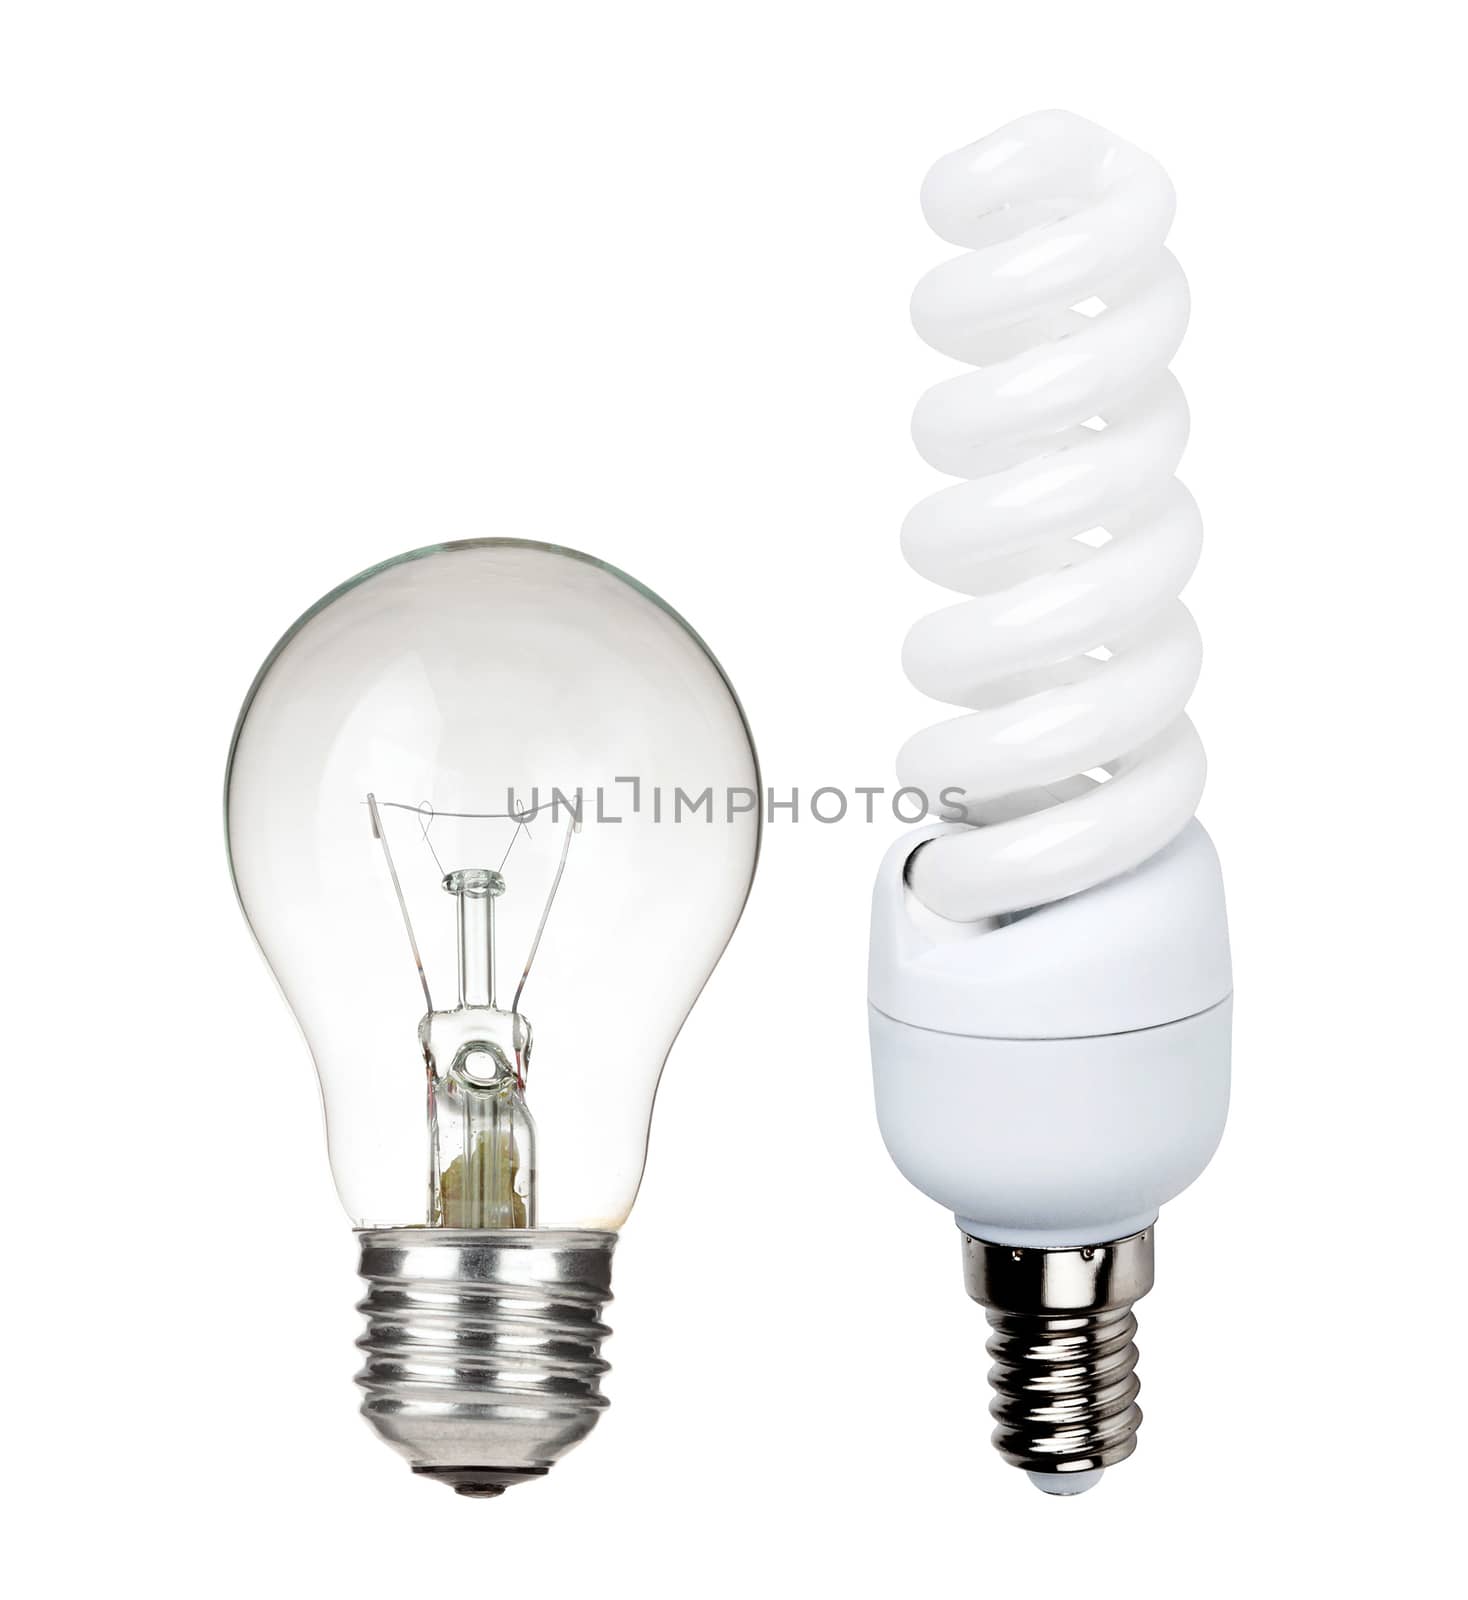 two different light bulbs